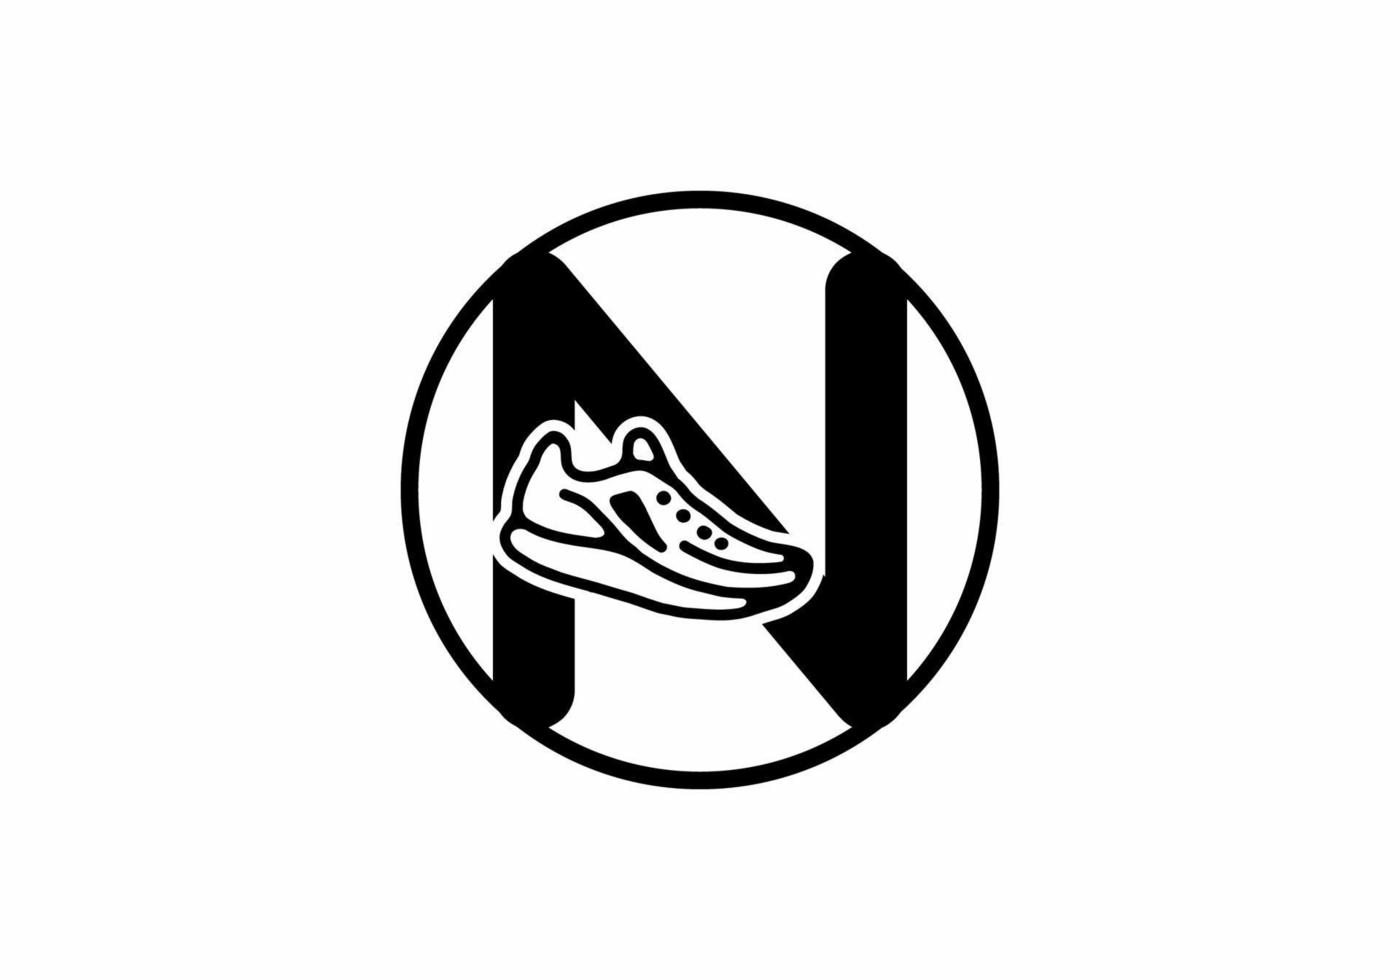 Black N initial letter with shoes in circle vector